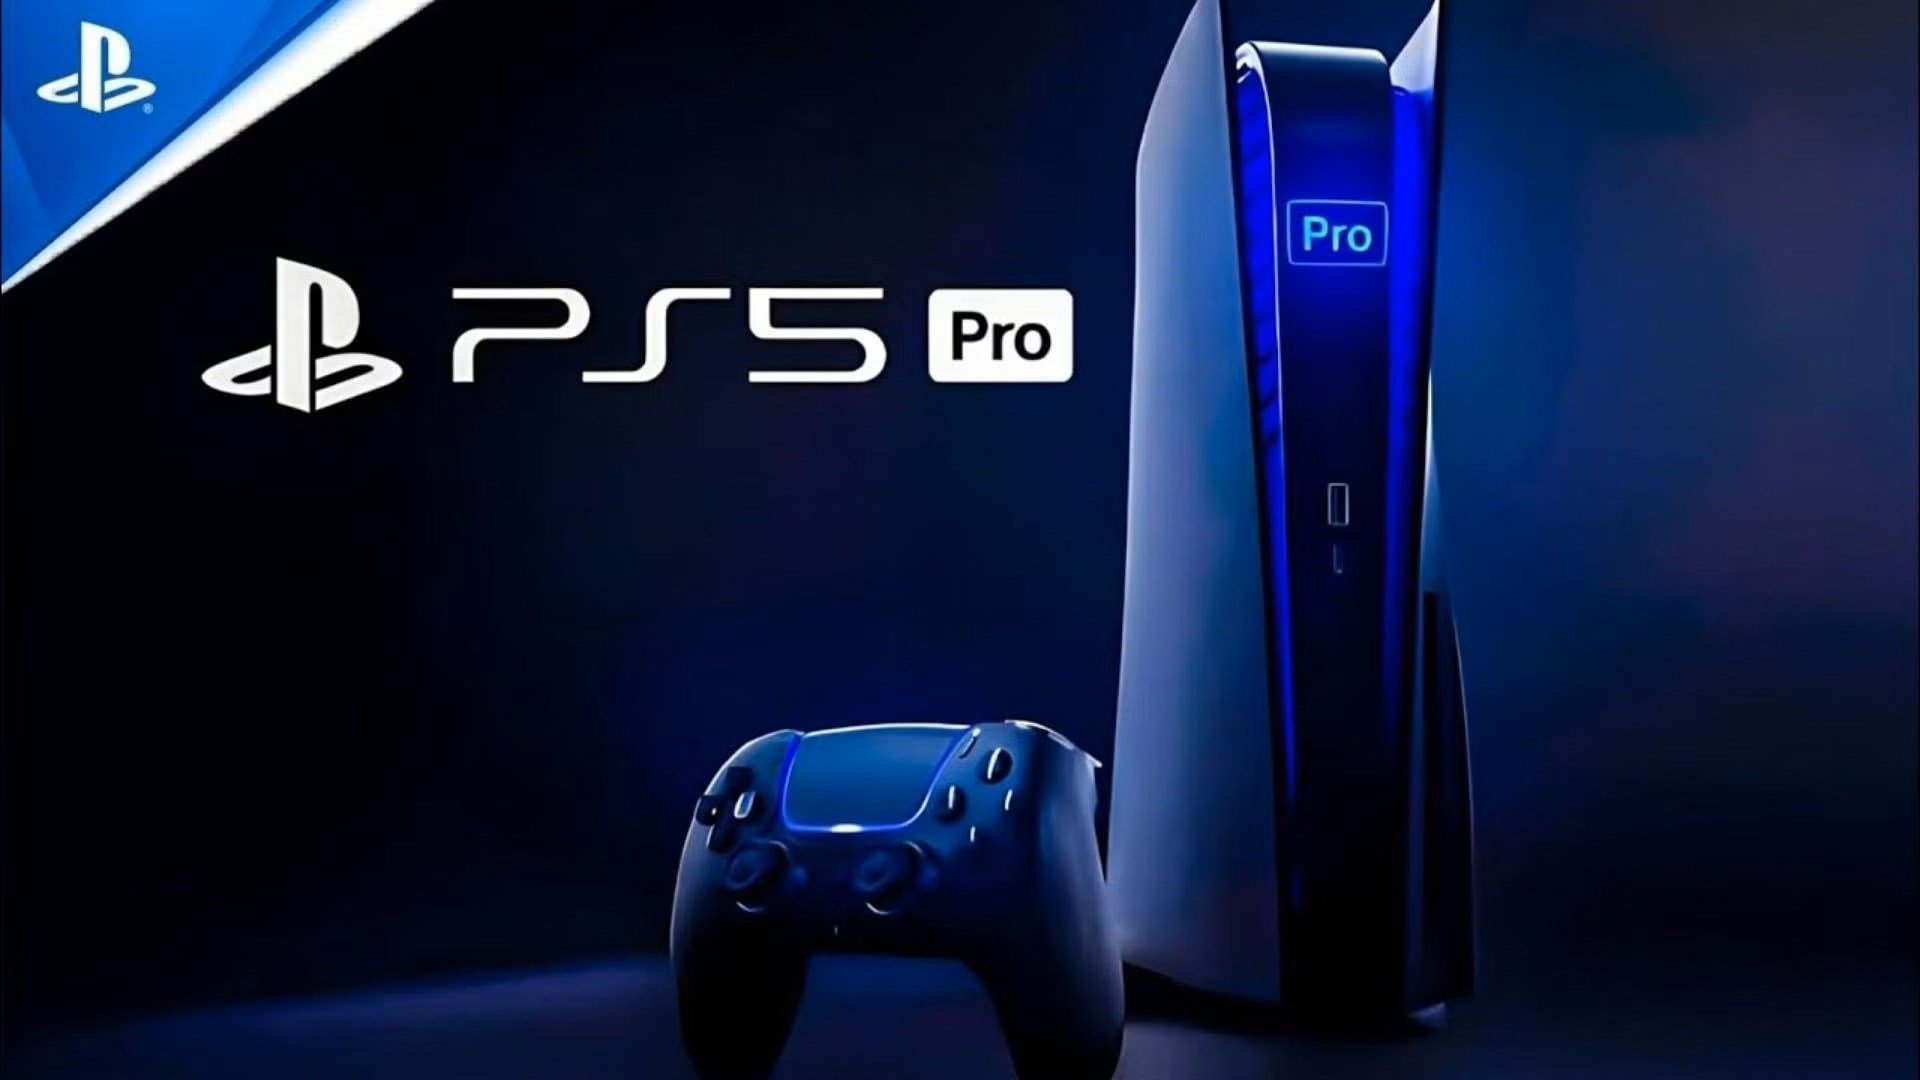 Leaker says Sony expects PS5 Pro specs to surface this month, as